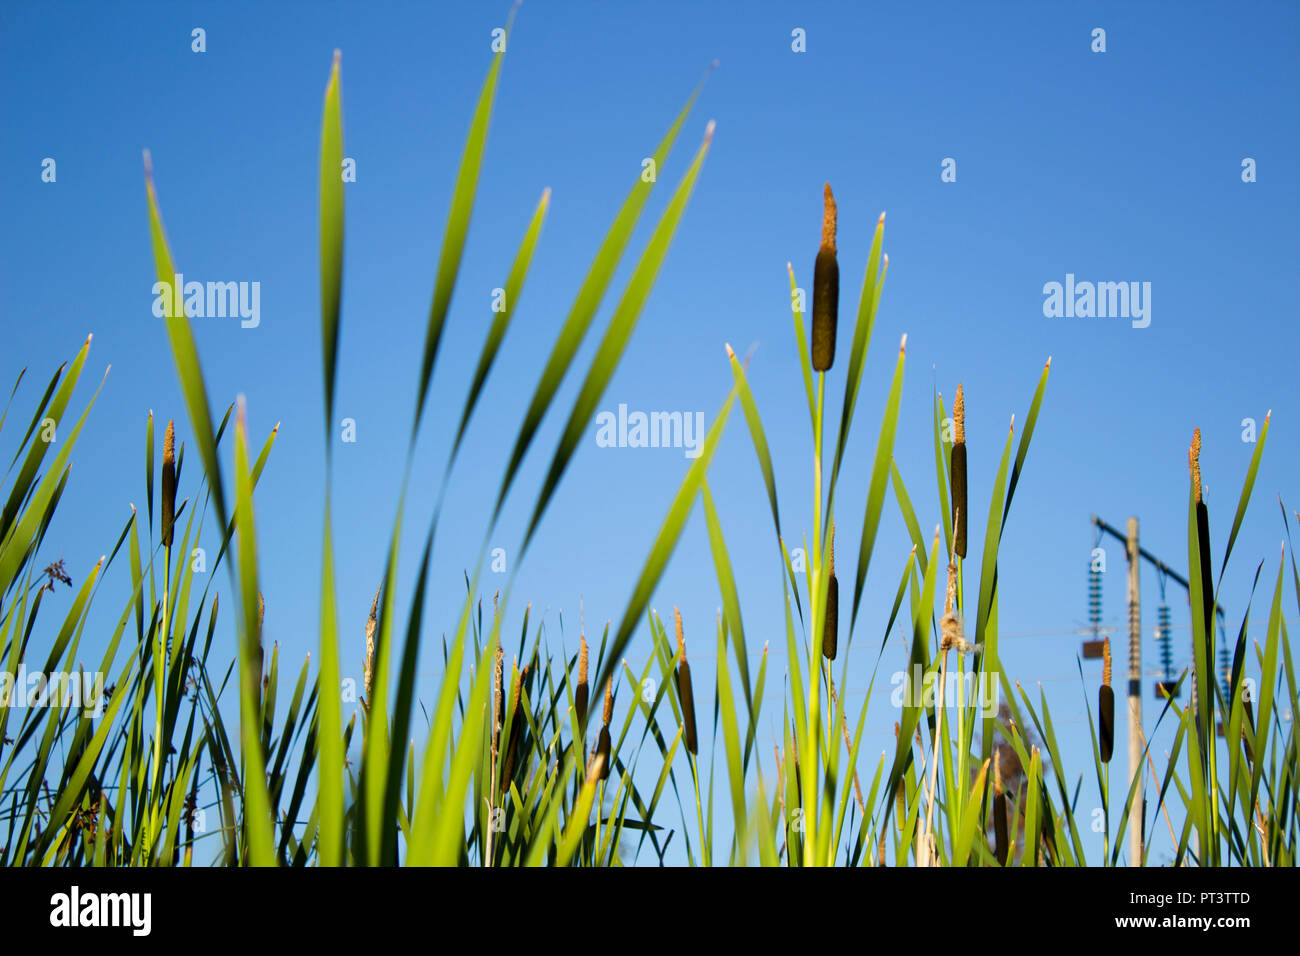 broadleaf cattail - typha latifolia - with blue sky in the background. Stock Photo